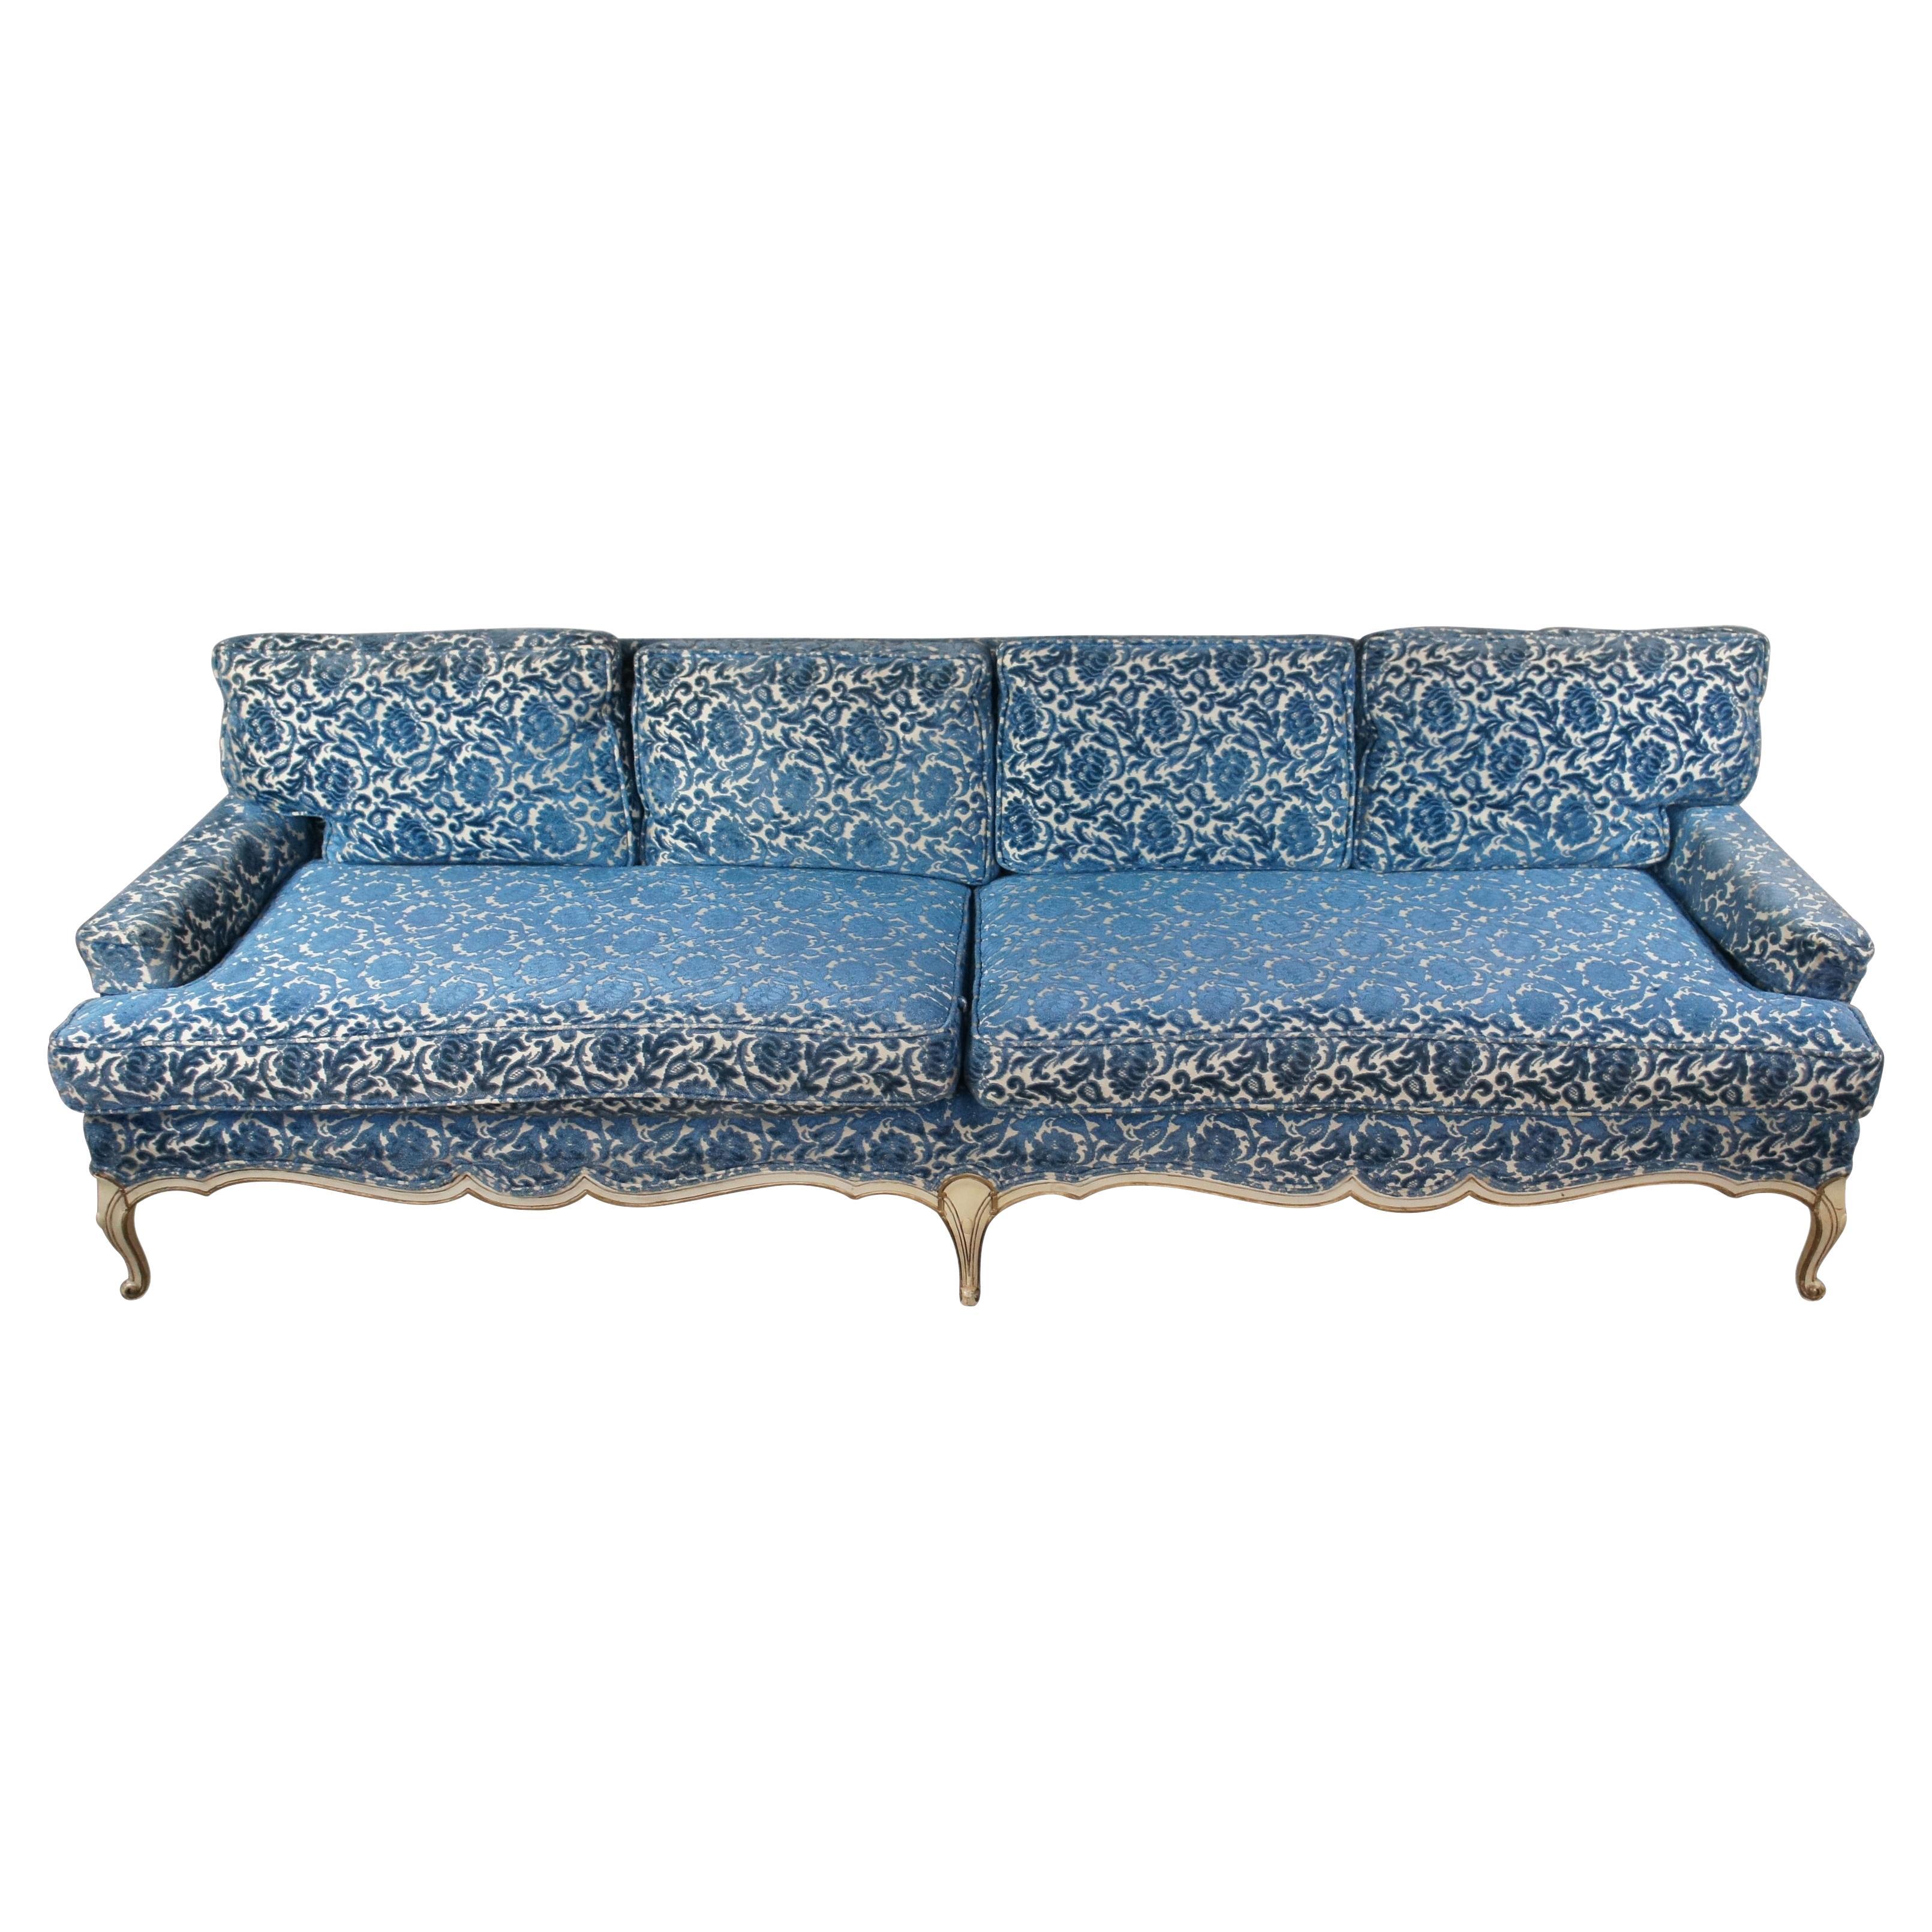 French Provincial Sofas 16 For